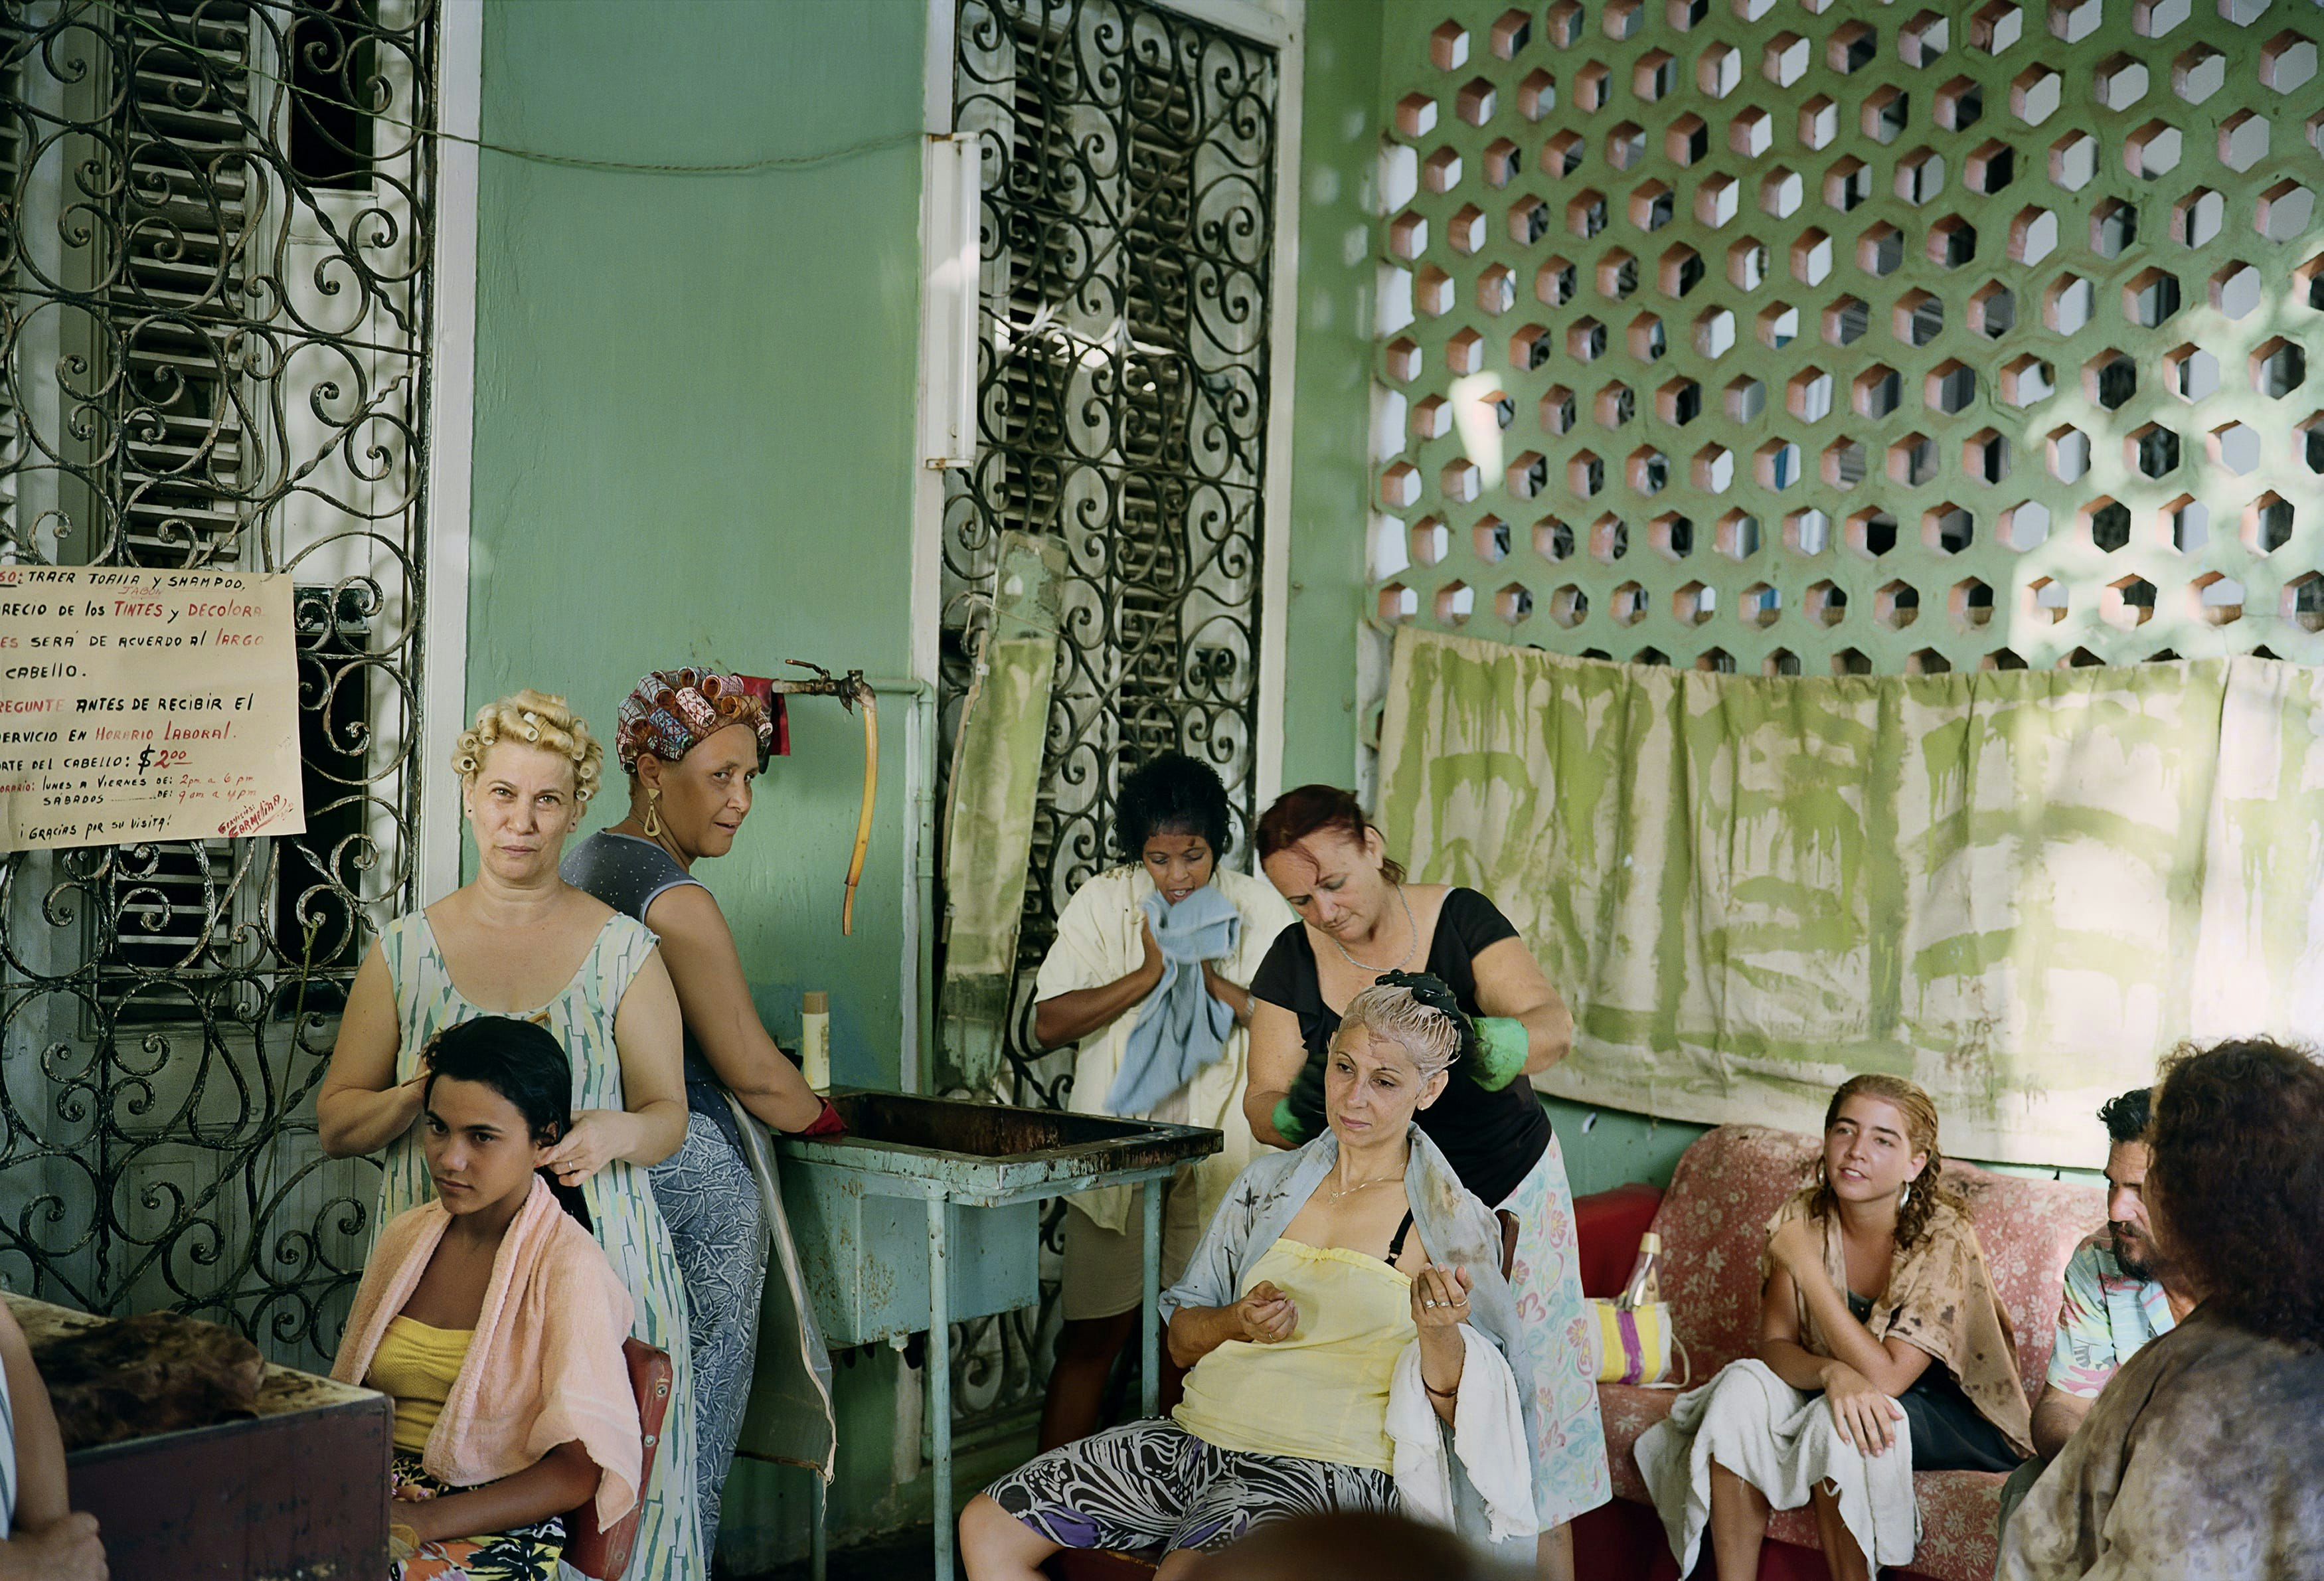 One of more widely published and sold images from the series, a beauty salon in the residential neighborhood of Vedado provides services on the back patio of a private home during the era of economic hardship known as “the Special Period.”